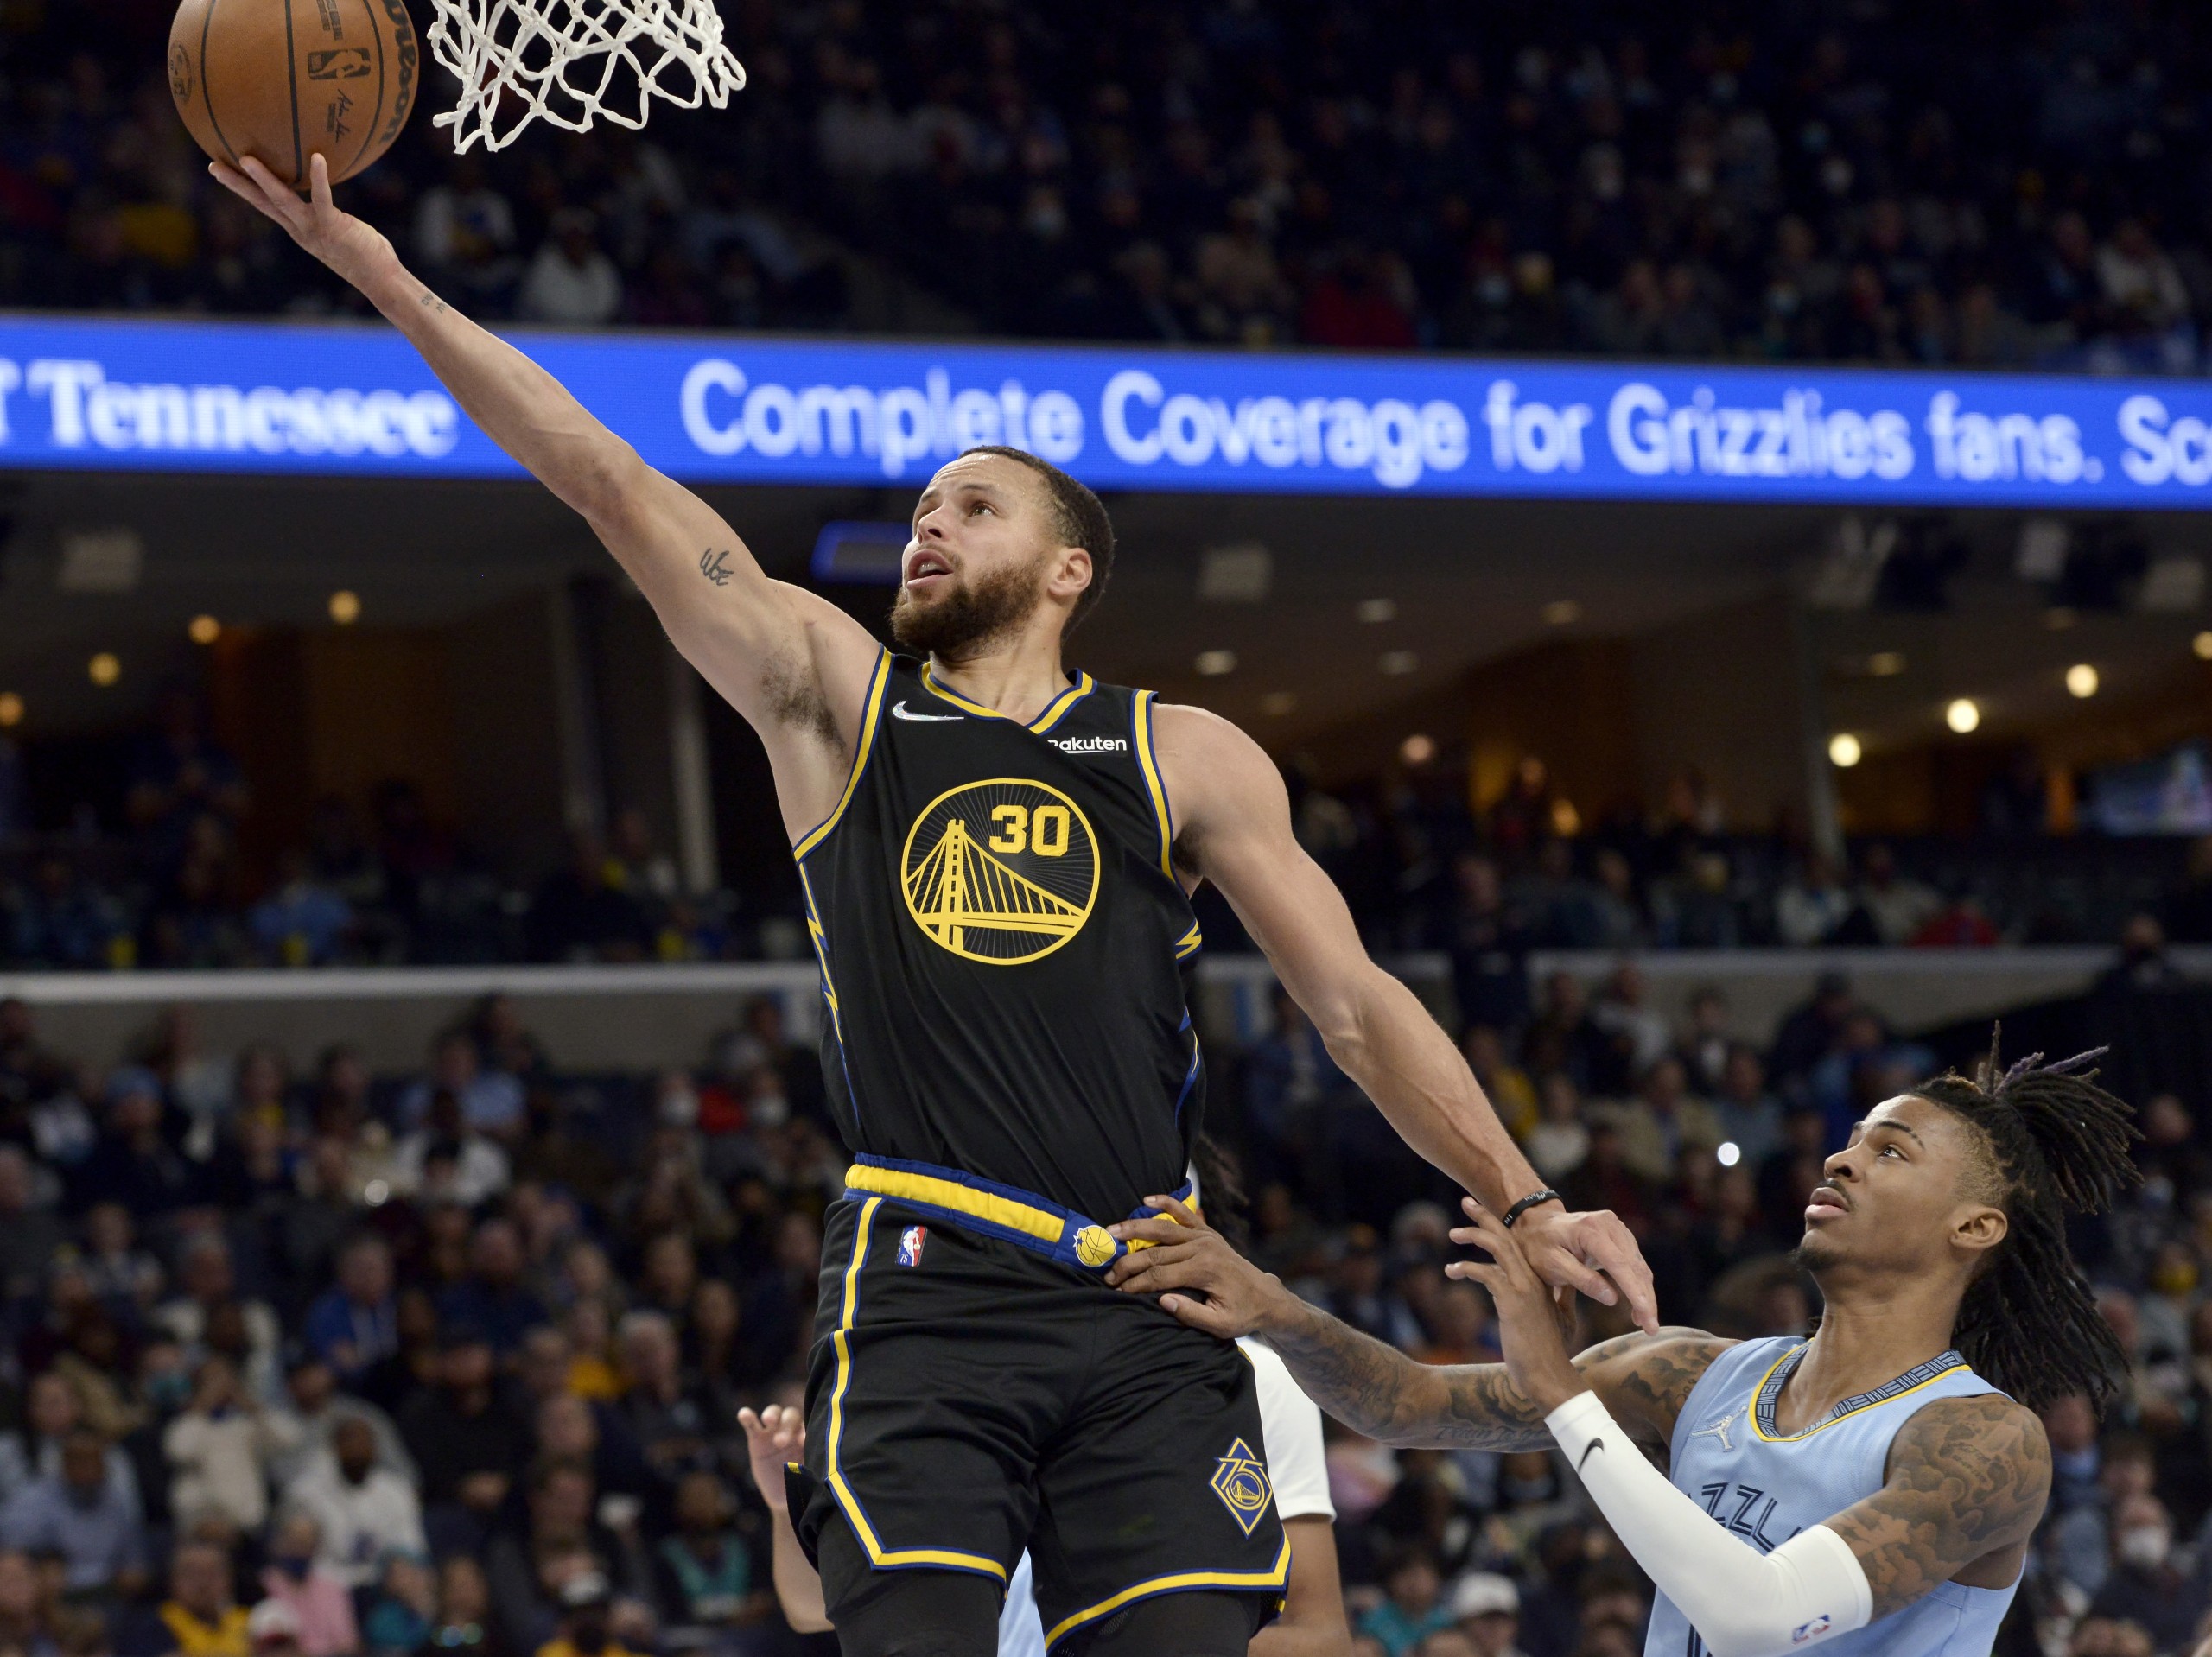 Golden State Warriors guard Stephen Curry (30) shoots the ball ahead of Memphis Grizzlies guard Ja Morant in the first half of an NBA basketball game Tuesday, Jan. 11, 2022, in Memphis, Tenn. (AP Photo/Brandon Dill)